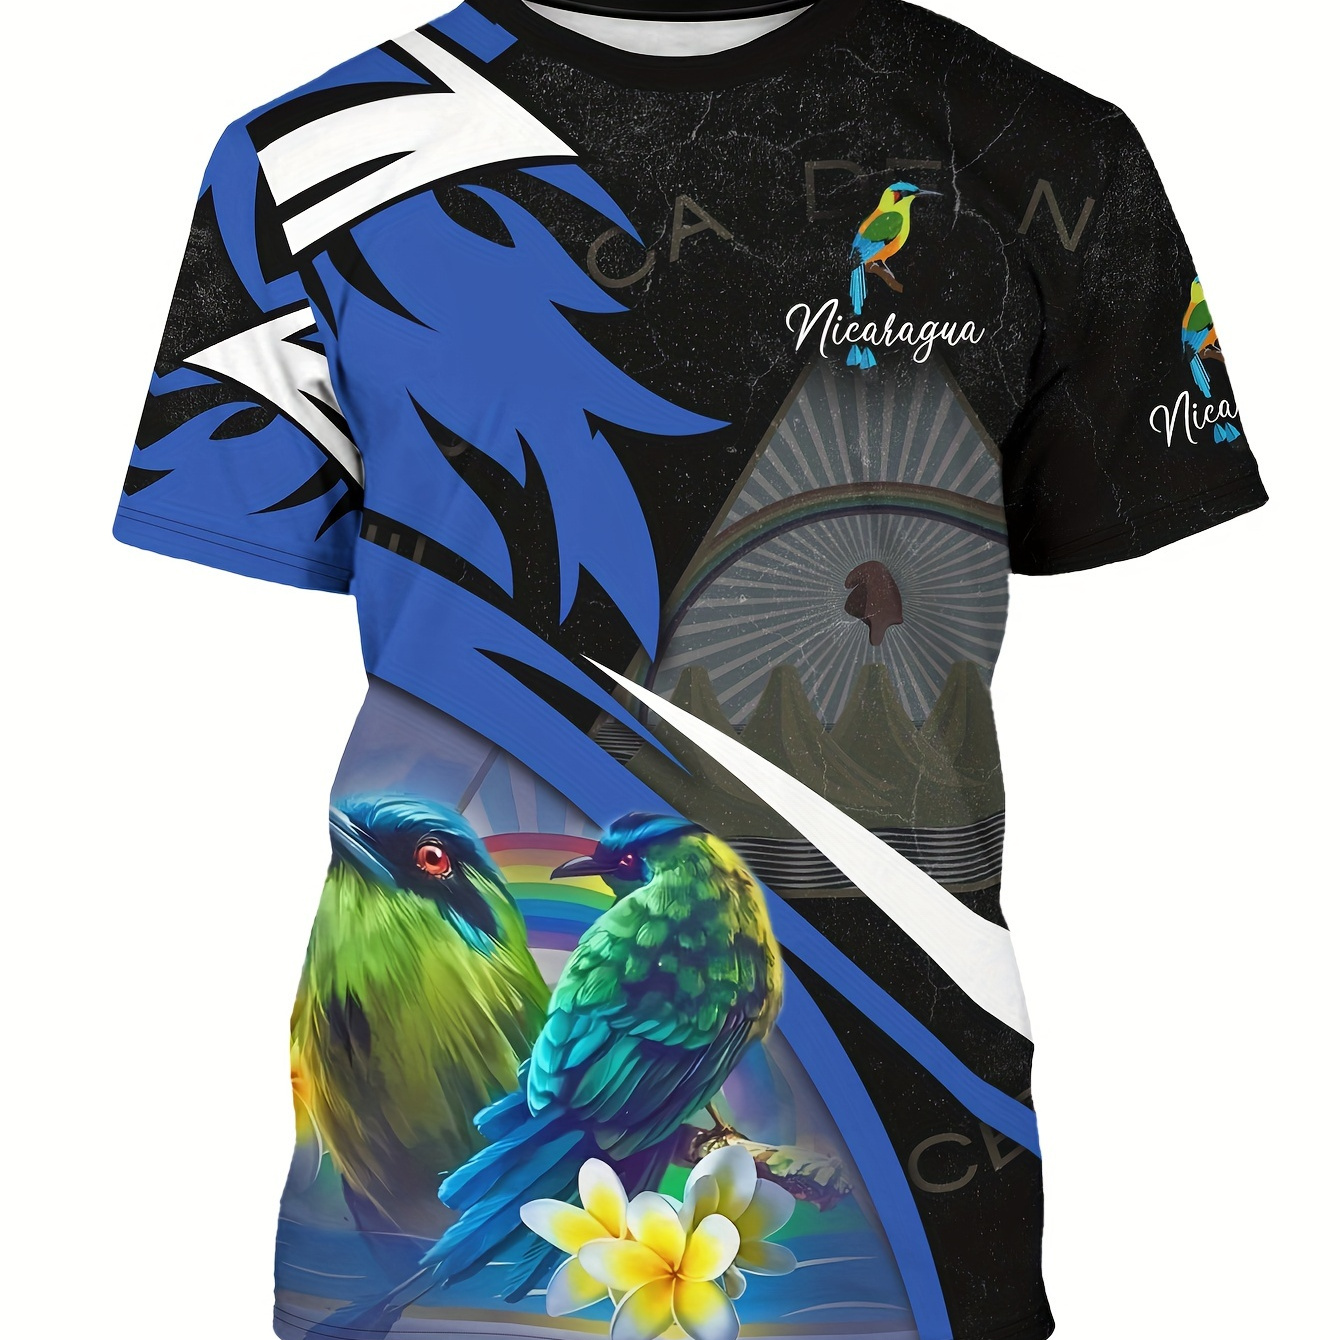 

Men's Nicaragua Theme Bird, Floral And Color Block Pattern Crew Neck Short Sleeve T-shirt, Chic And Trendy Tops For Summer Outdoors And Holiday Wear